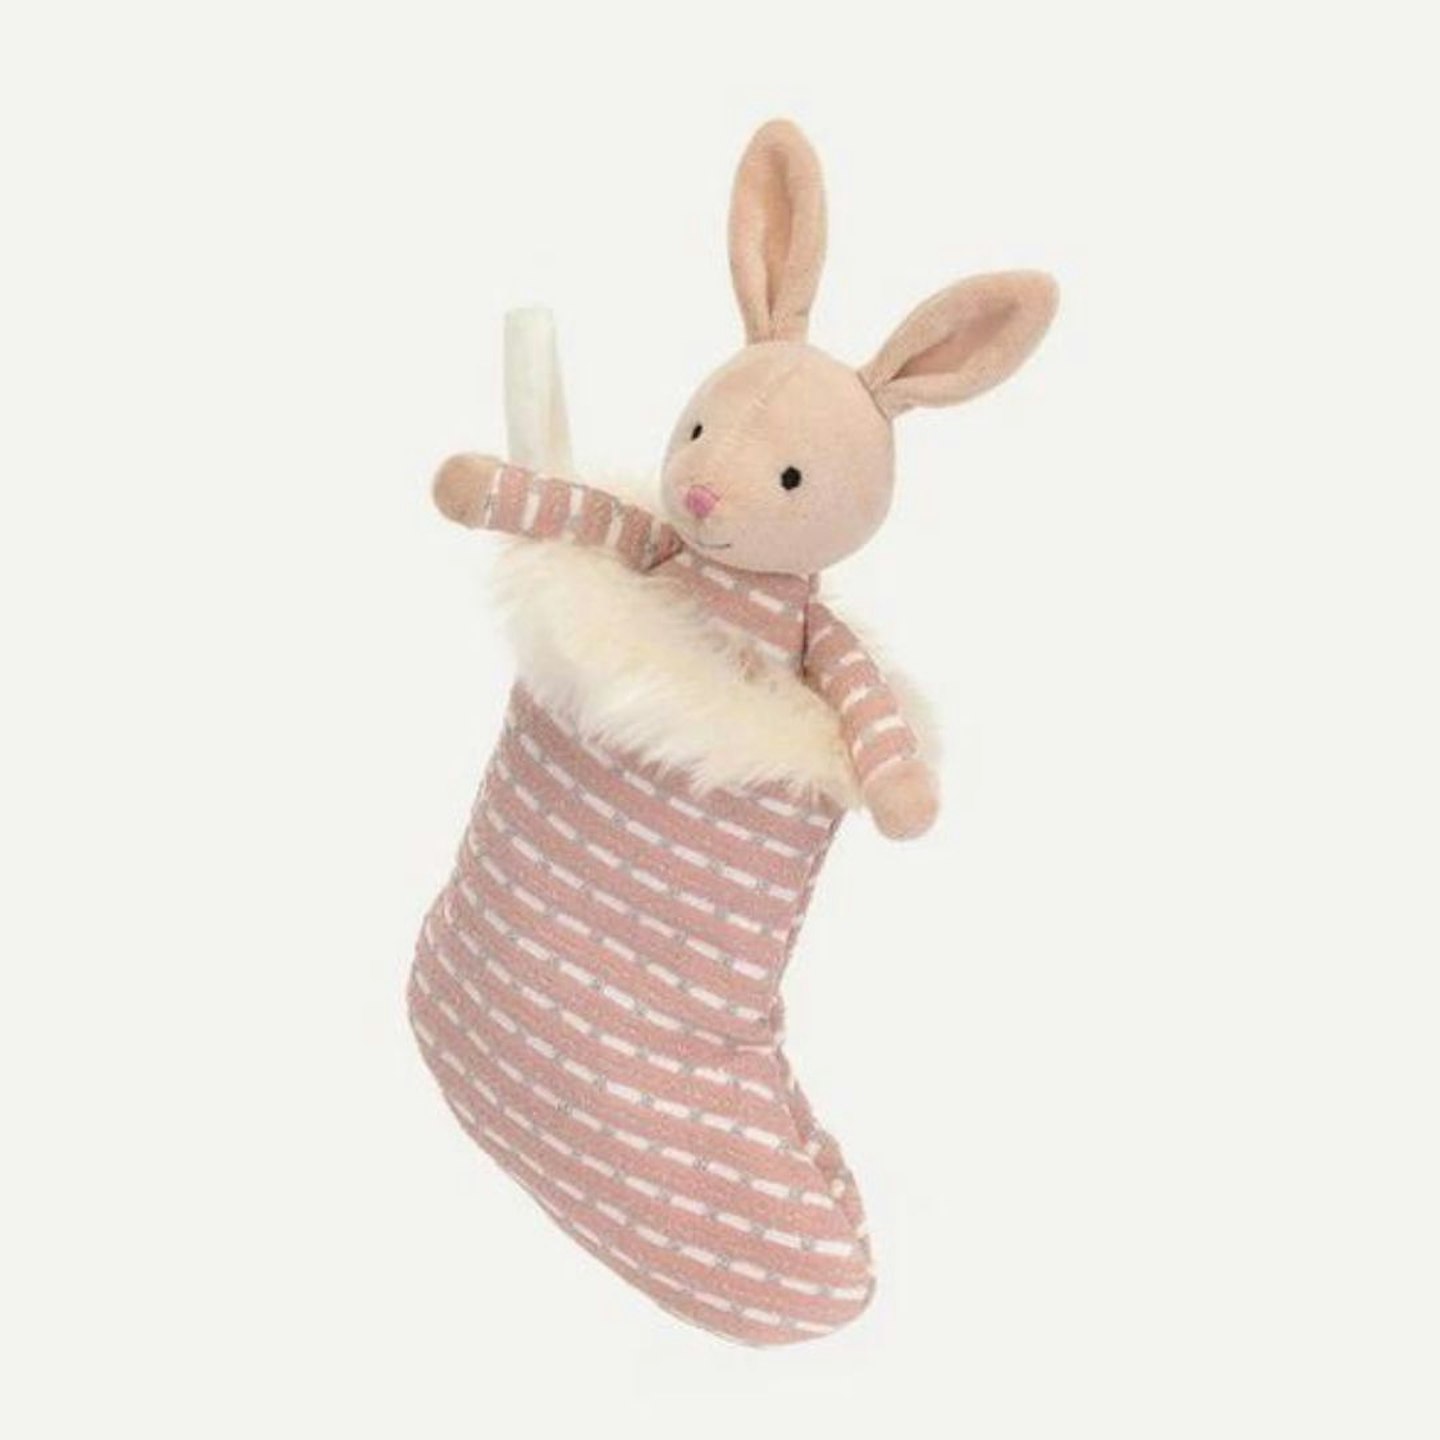 Best Christmas Gifts For Kids: Shimmer Stocking Bunny